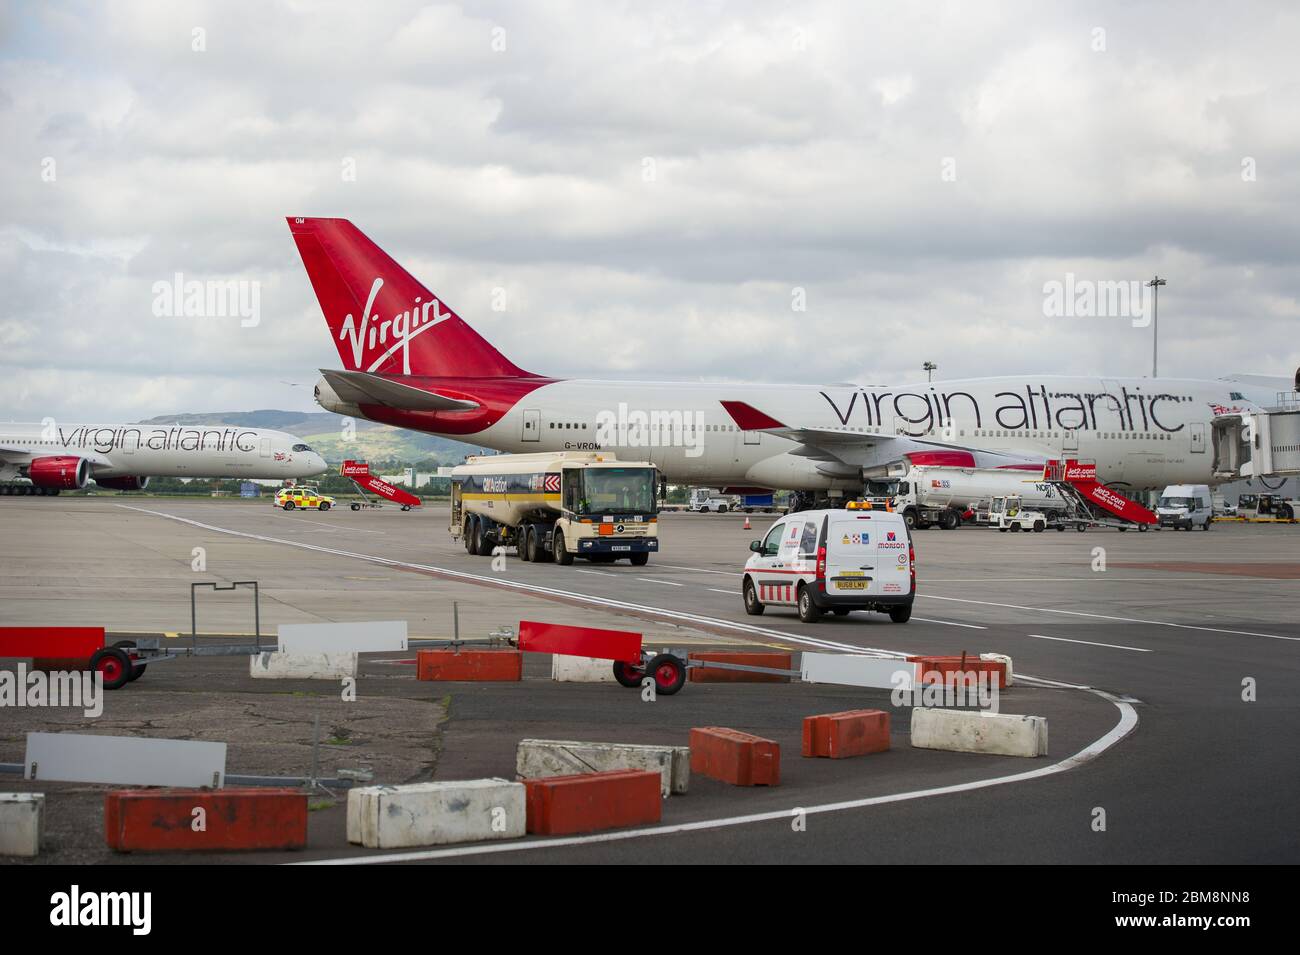 Glasgow, UK. 25 August 2019.  Pictured: Virgin Atlantic Boeing 747-400 reg G-VROM nicknamed Barbarella is one of the long haul wide die body aircraft in Virgin's leisure fleet. Normally covering London Gatwick, this aircraft serves Glasgow 3 times per week. Credit: Colin Fisher/Alamy Live News. Stock Photo